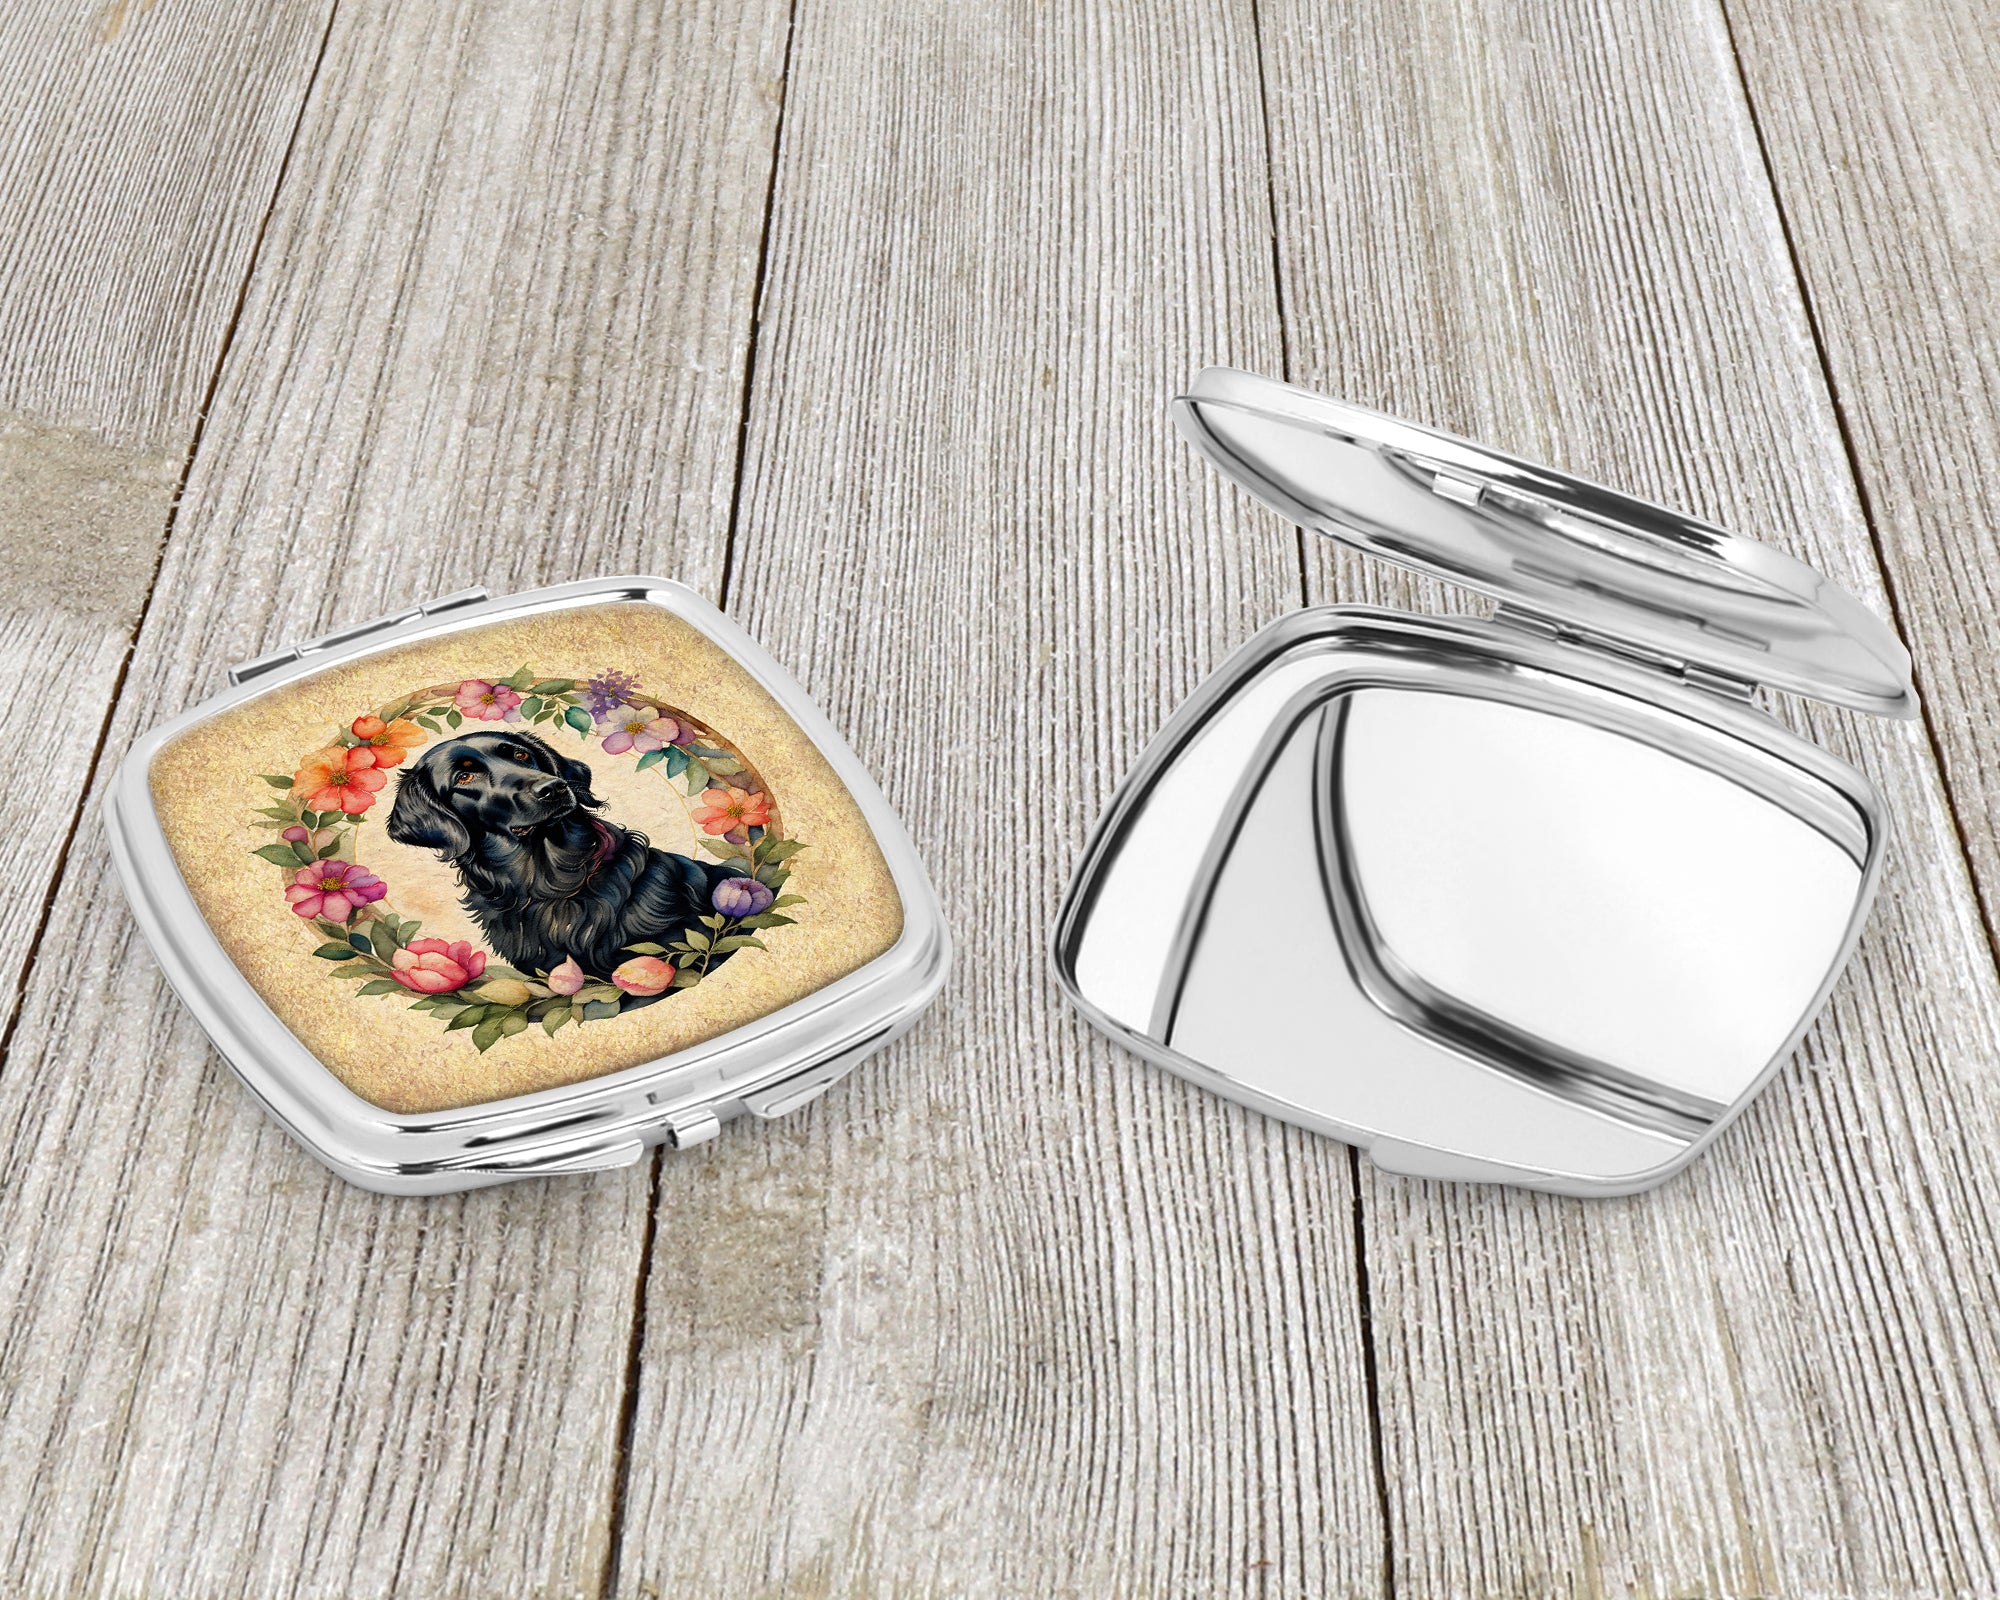 Flat-Coated Retriever and Flowers Compact Mirror